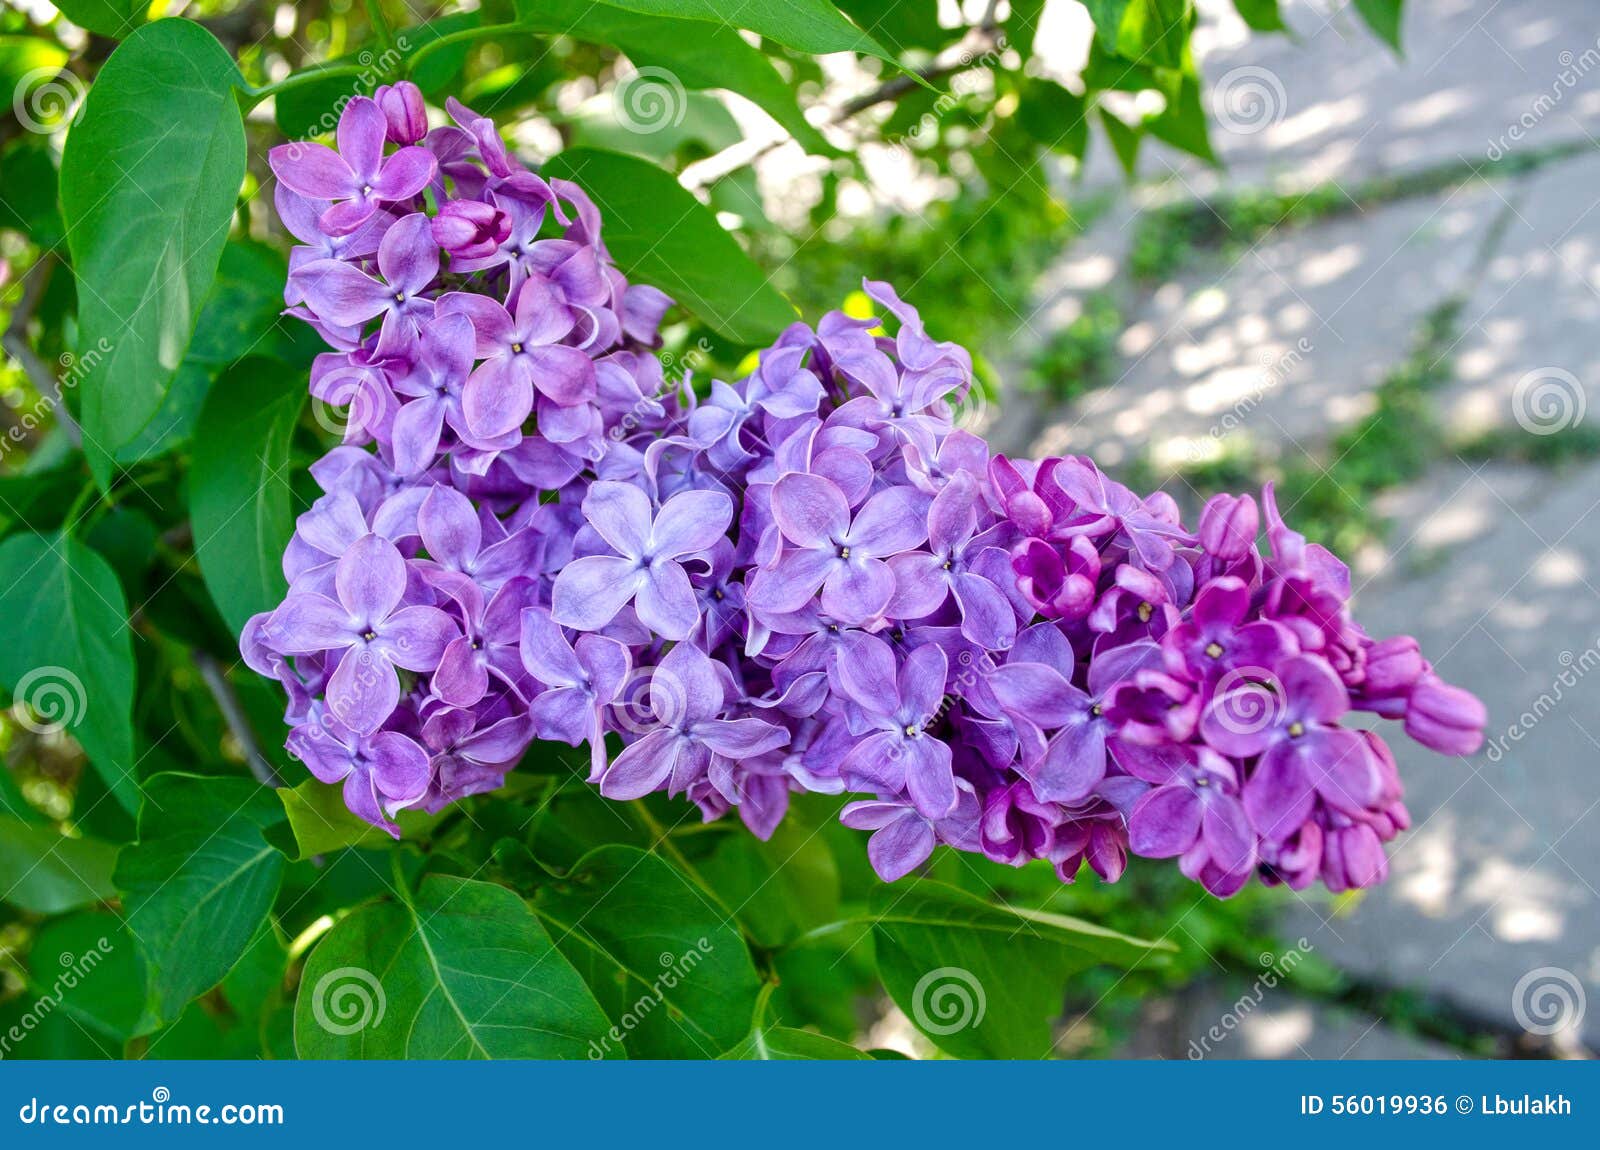 flowers of lilac tree